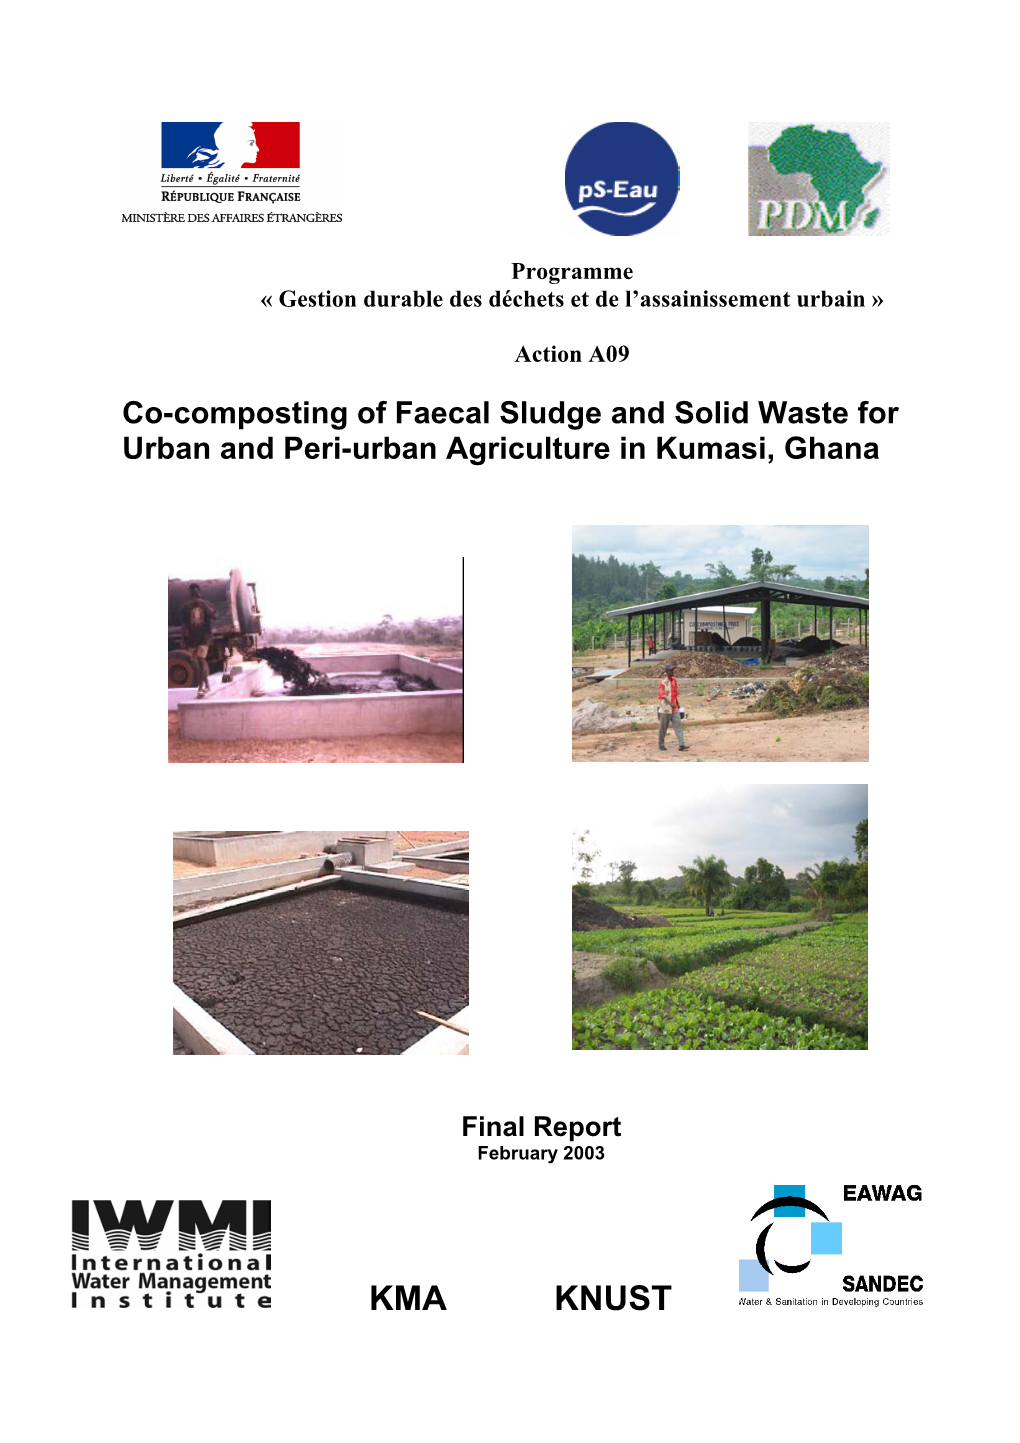 Co-Composting of Faecal Sludge and Solid Waste for Urban and Peri-Urban Agriculture in Kumasi, Ghana